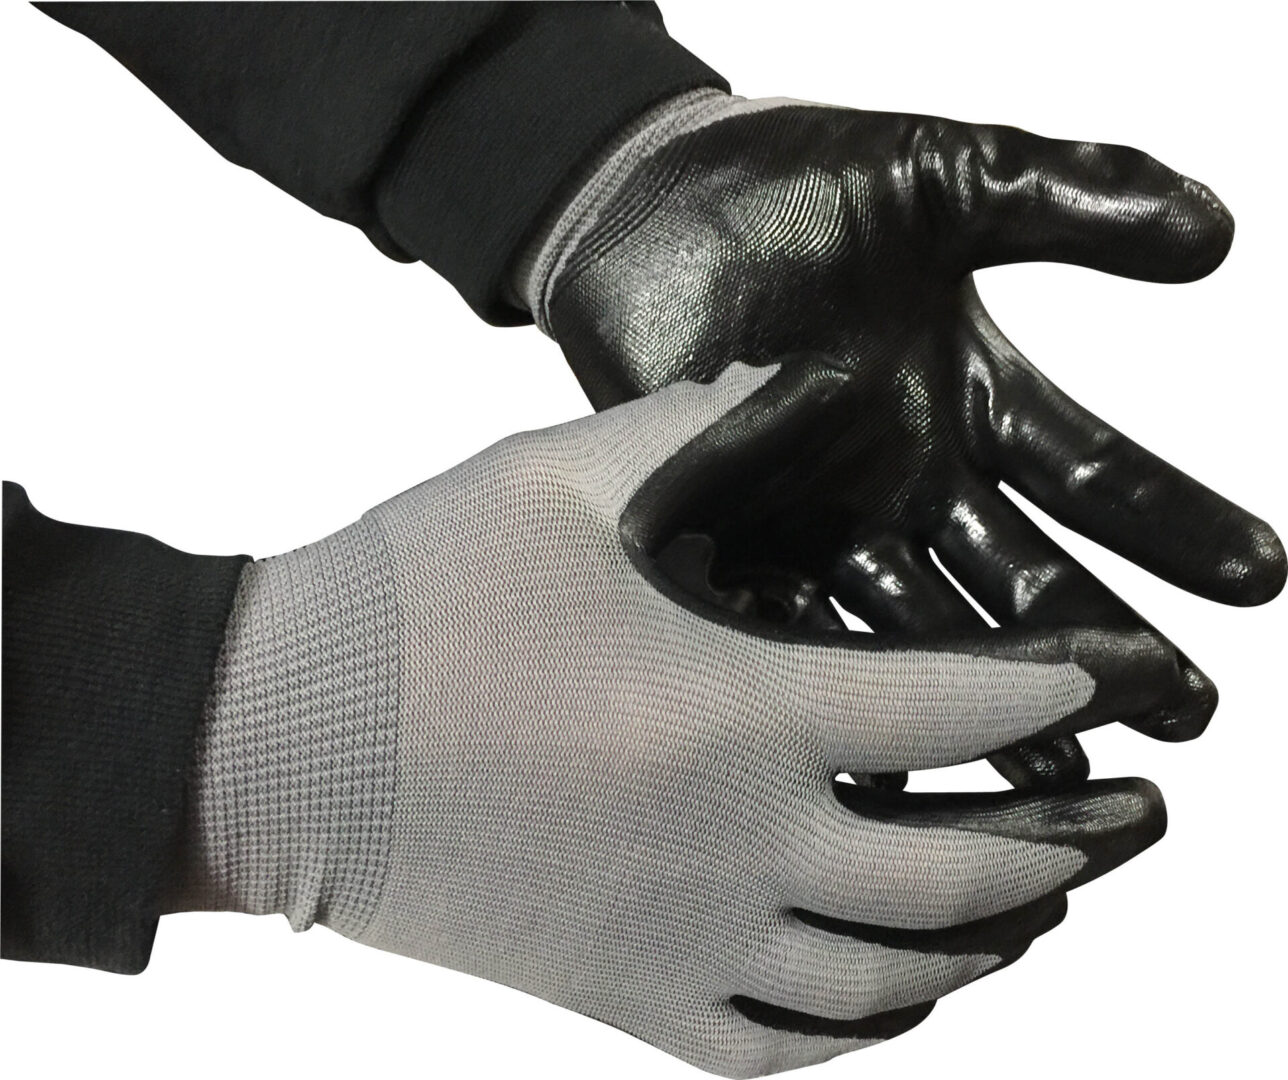 All-Purpose Gloves